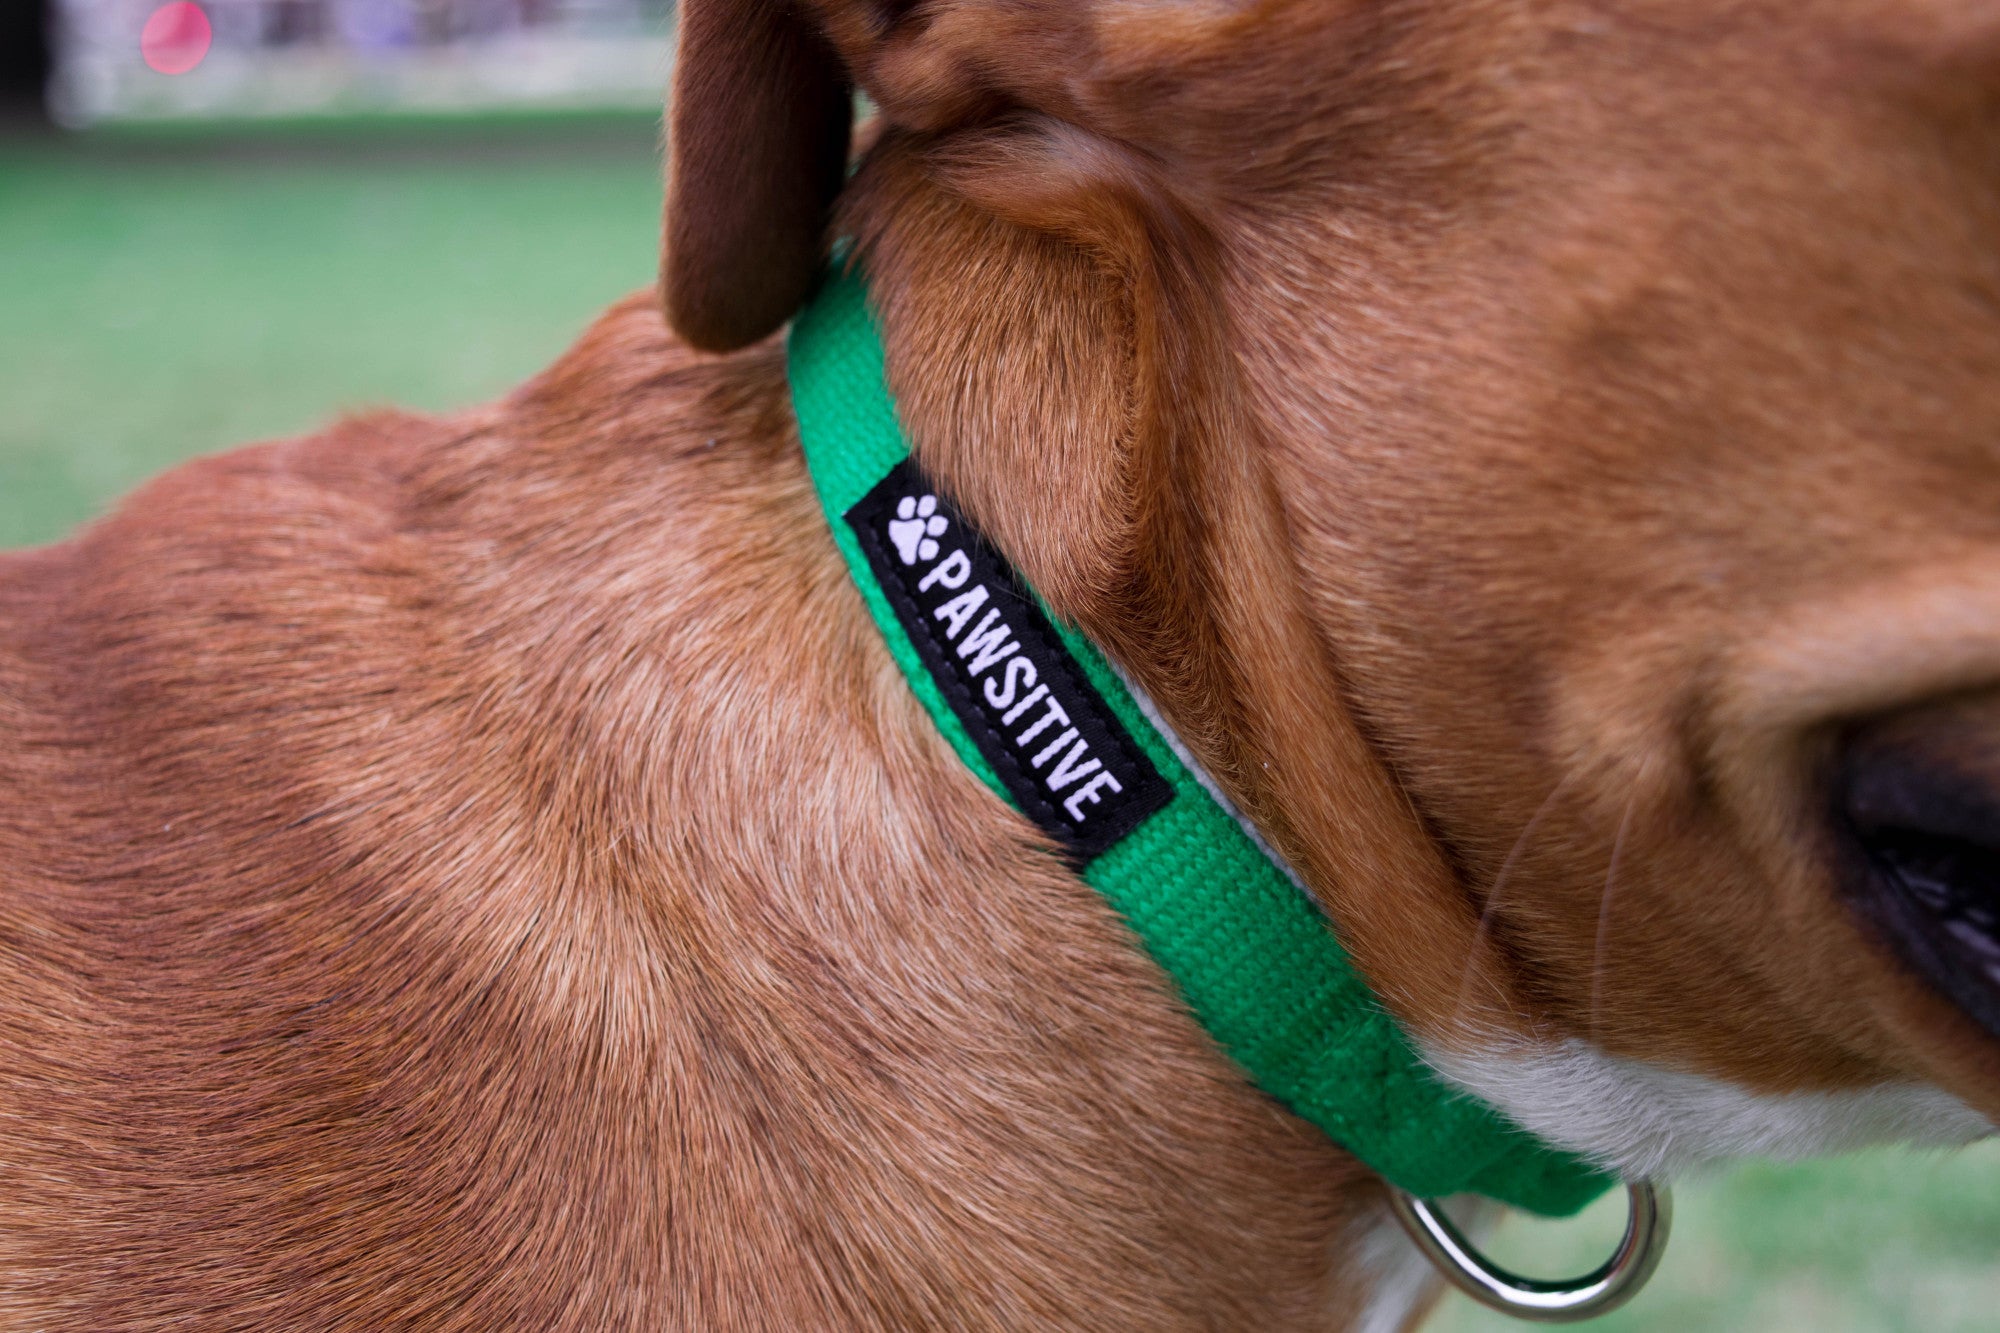 Classic Colors Hemp Adjustable Dog Collar - Gracie To The Rescue